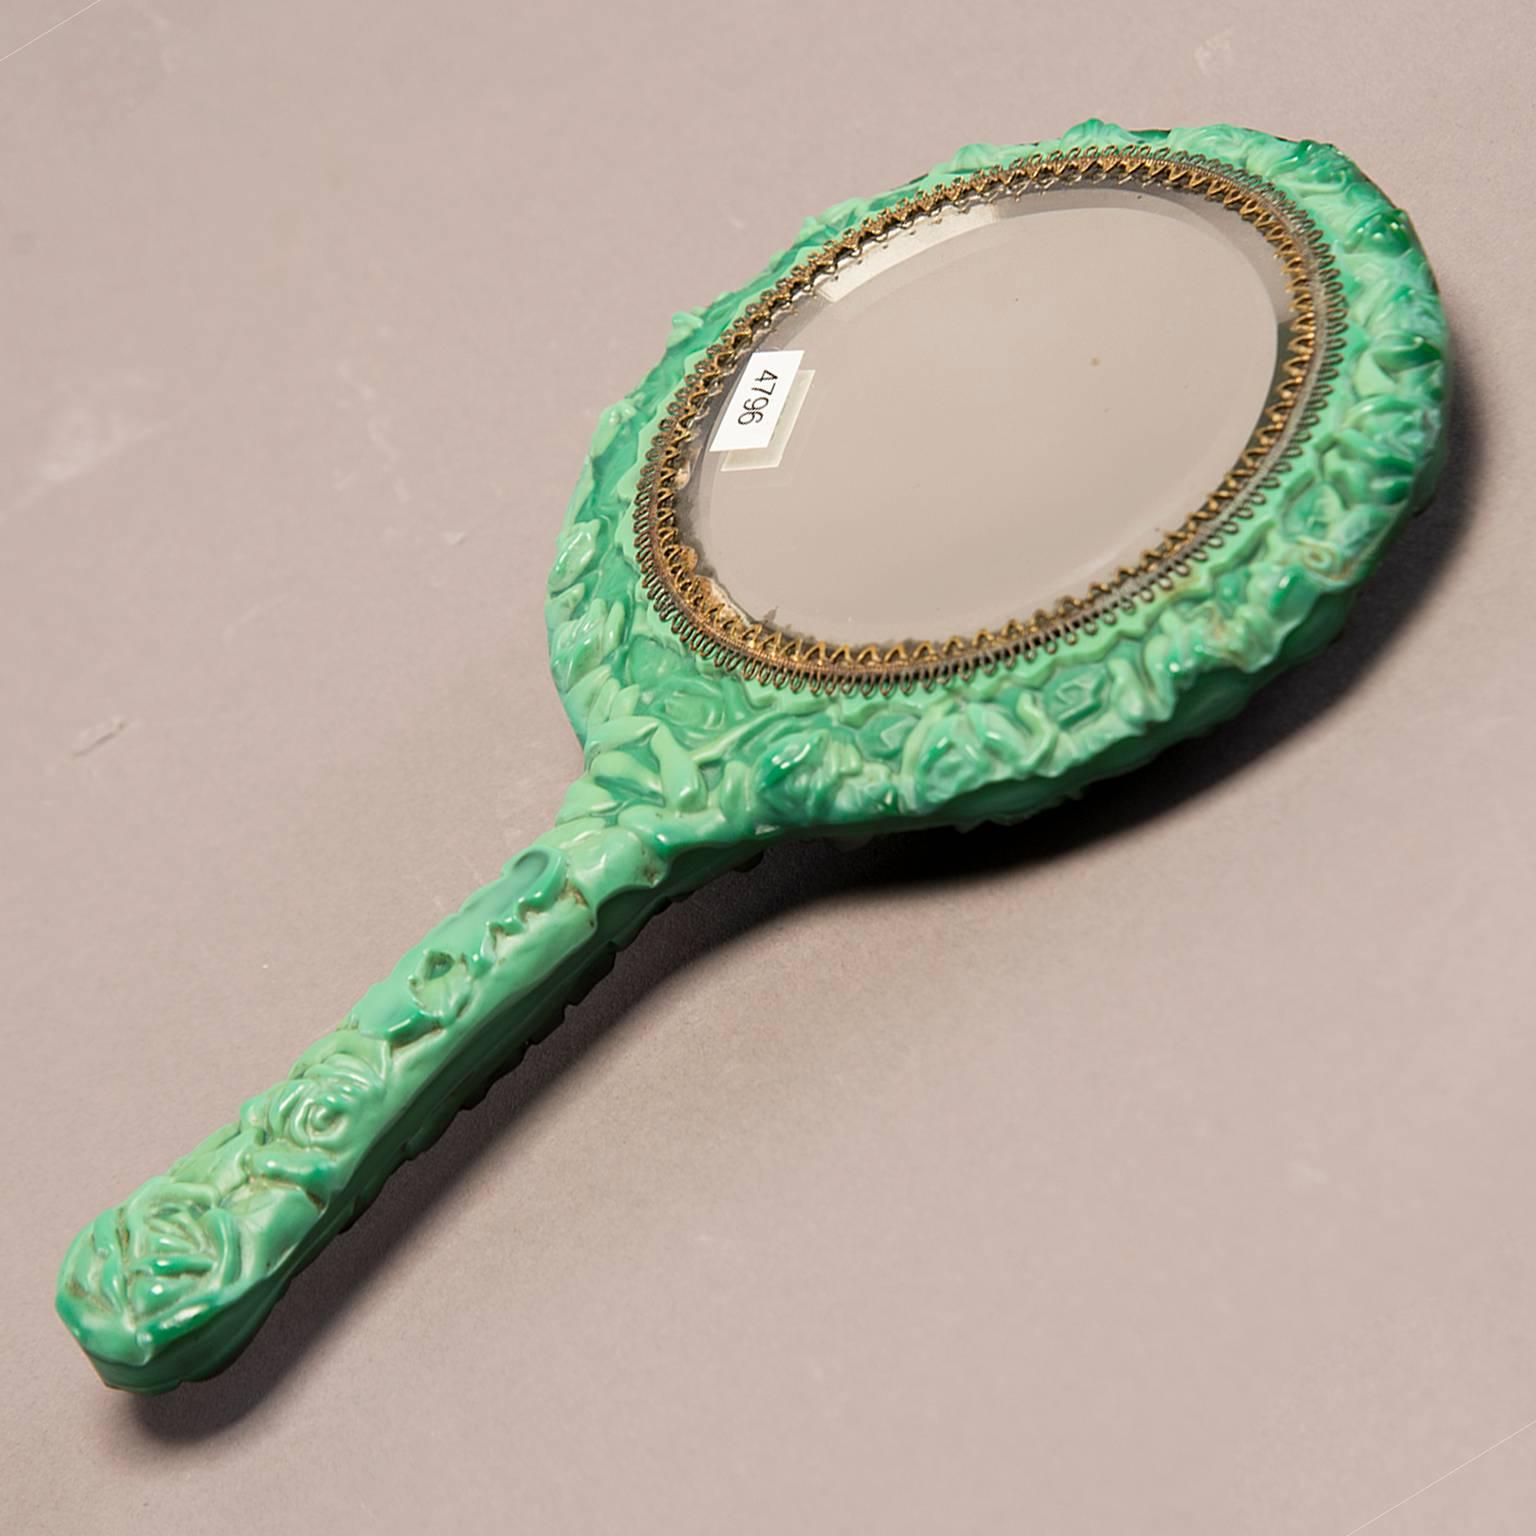 Deco era malachite glass hand mirror by Schlevogt from the Ingrid Collection. Malachite glass surround features a seated nude woman with flowing hair rendered in relief encircled by roses. Round, beveled edge mirror with brass filigree edge. Made in